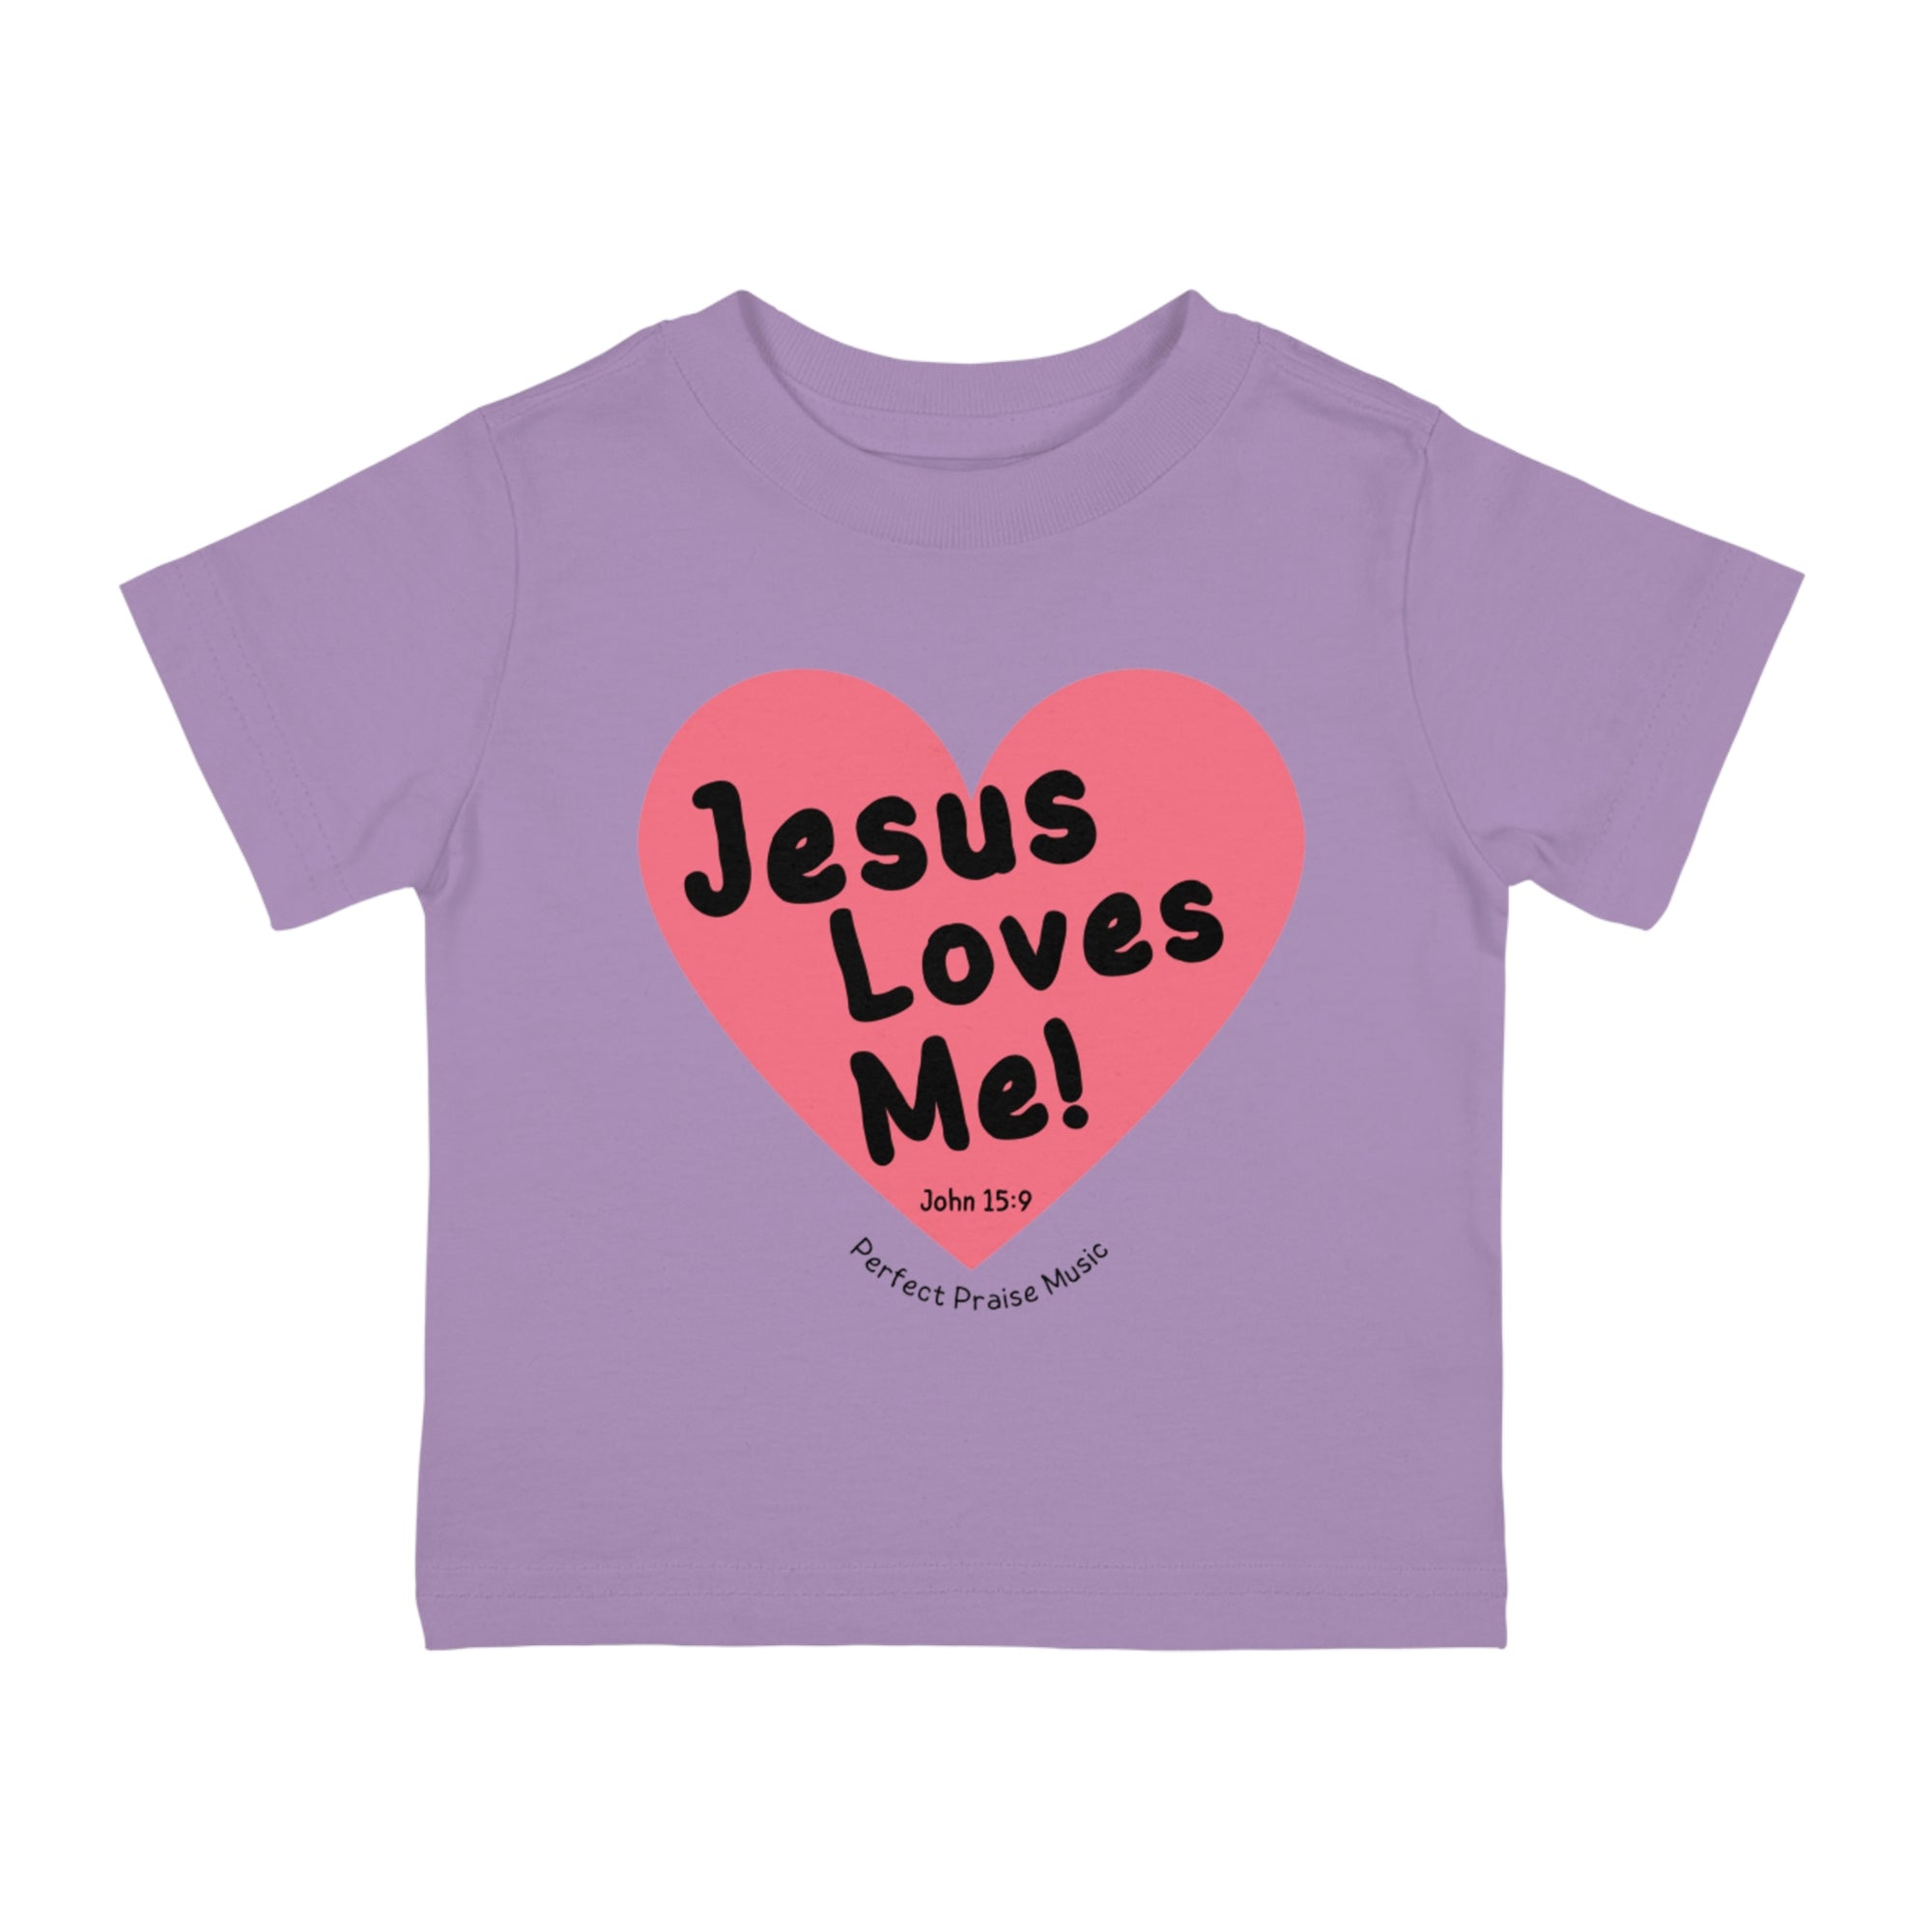 Jesus Love em Toddler Tee shirt will become your child's favorite Christian apparel. Comes in many colors and sizes.